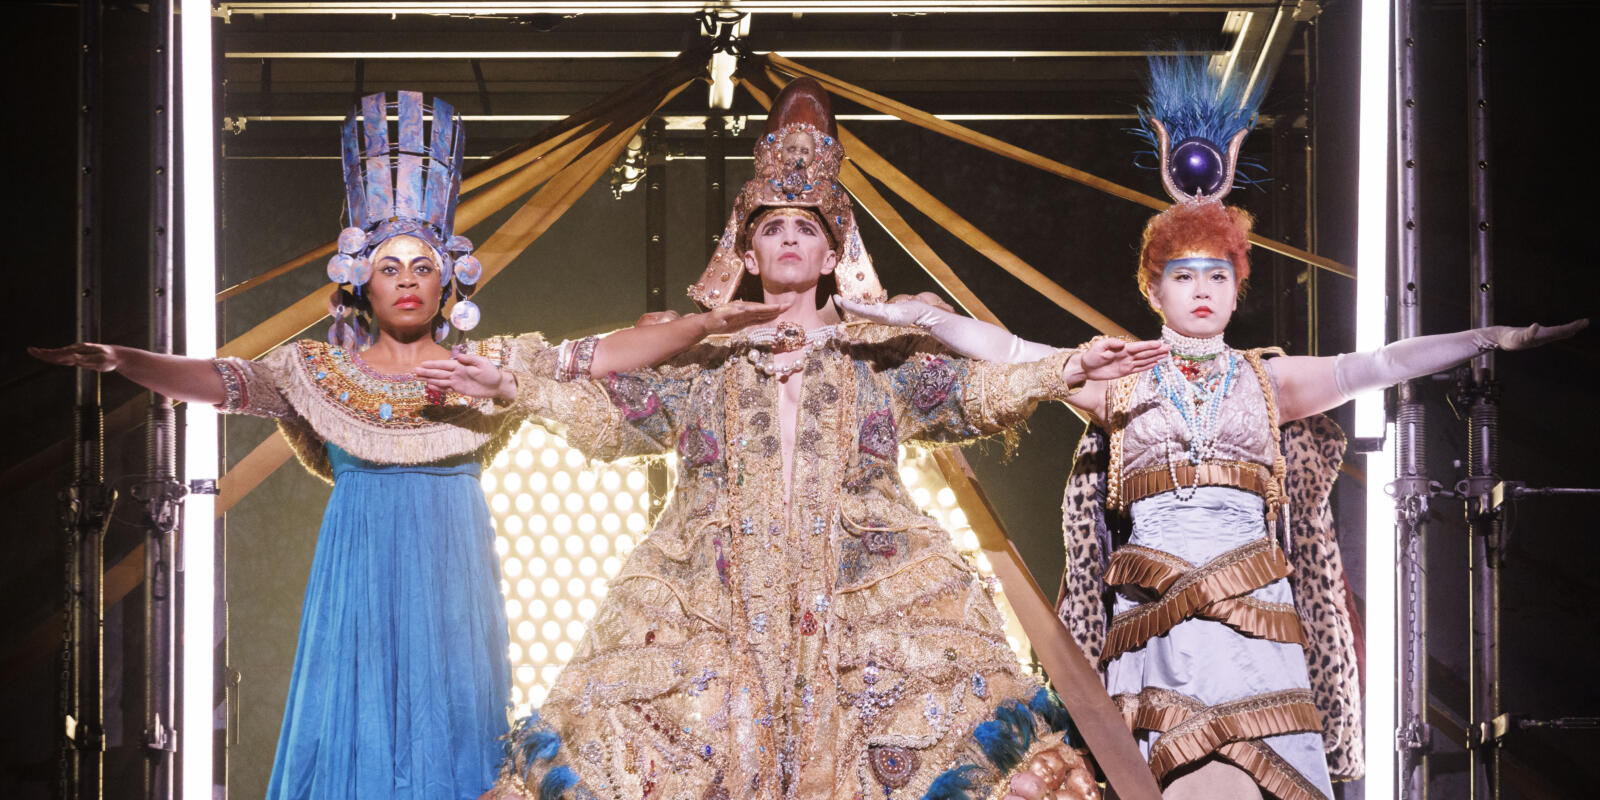 ‘Akhnaten’, opera by Philip Glass produced by Phelim McDermott, returns to the English National Opera (ENO) at the London Coliseum. Pictured: Nefertiti played by Chrystal E. Williams (L), Akhnaten played by Anthony Roth Costanzo (C), Queen Tye played by Haegee Lee (R). Image shot on 9th March 2023. © Belinda Jiao jiao.bilin@gmail.com 07598931257 https://www.belindajiao.com/about